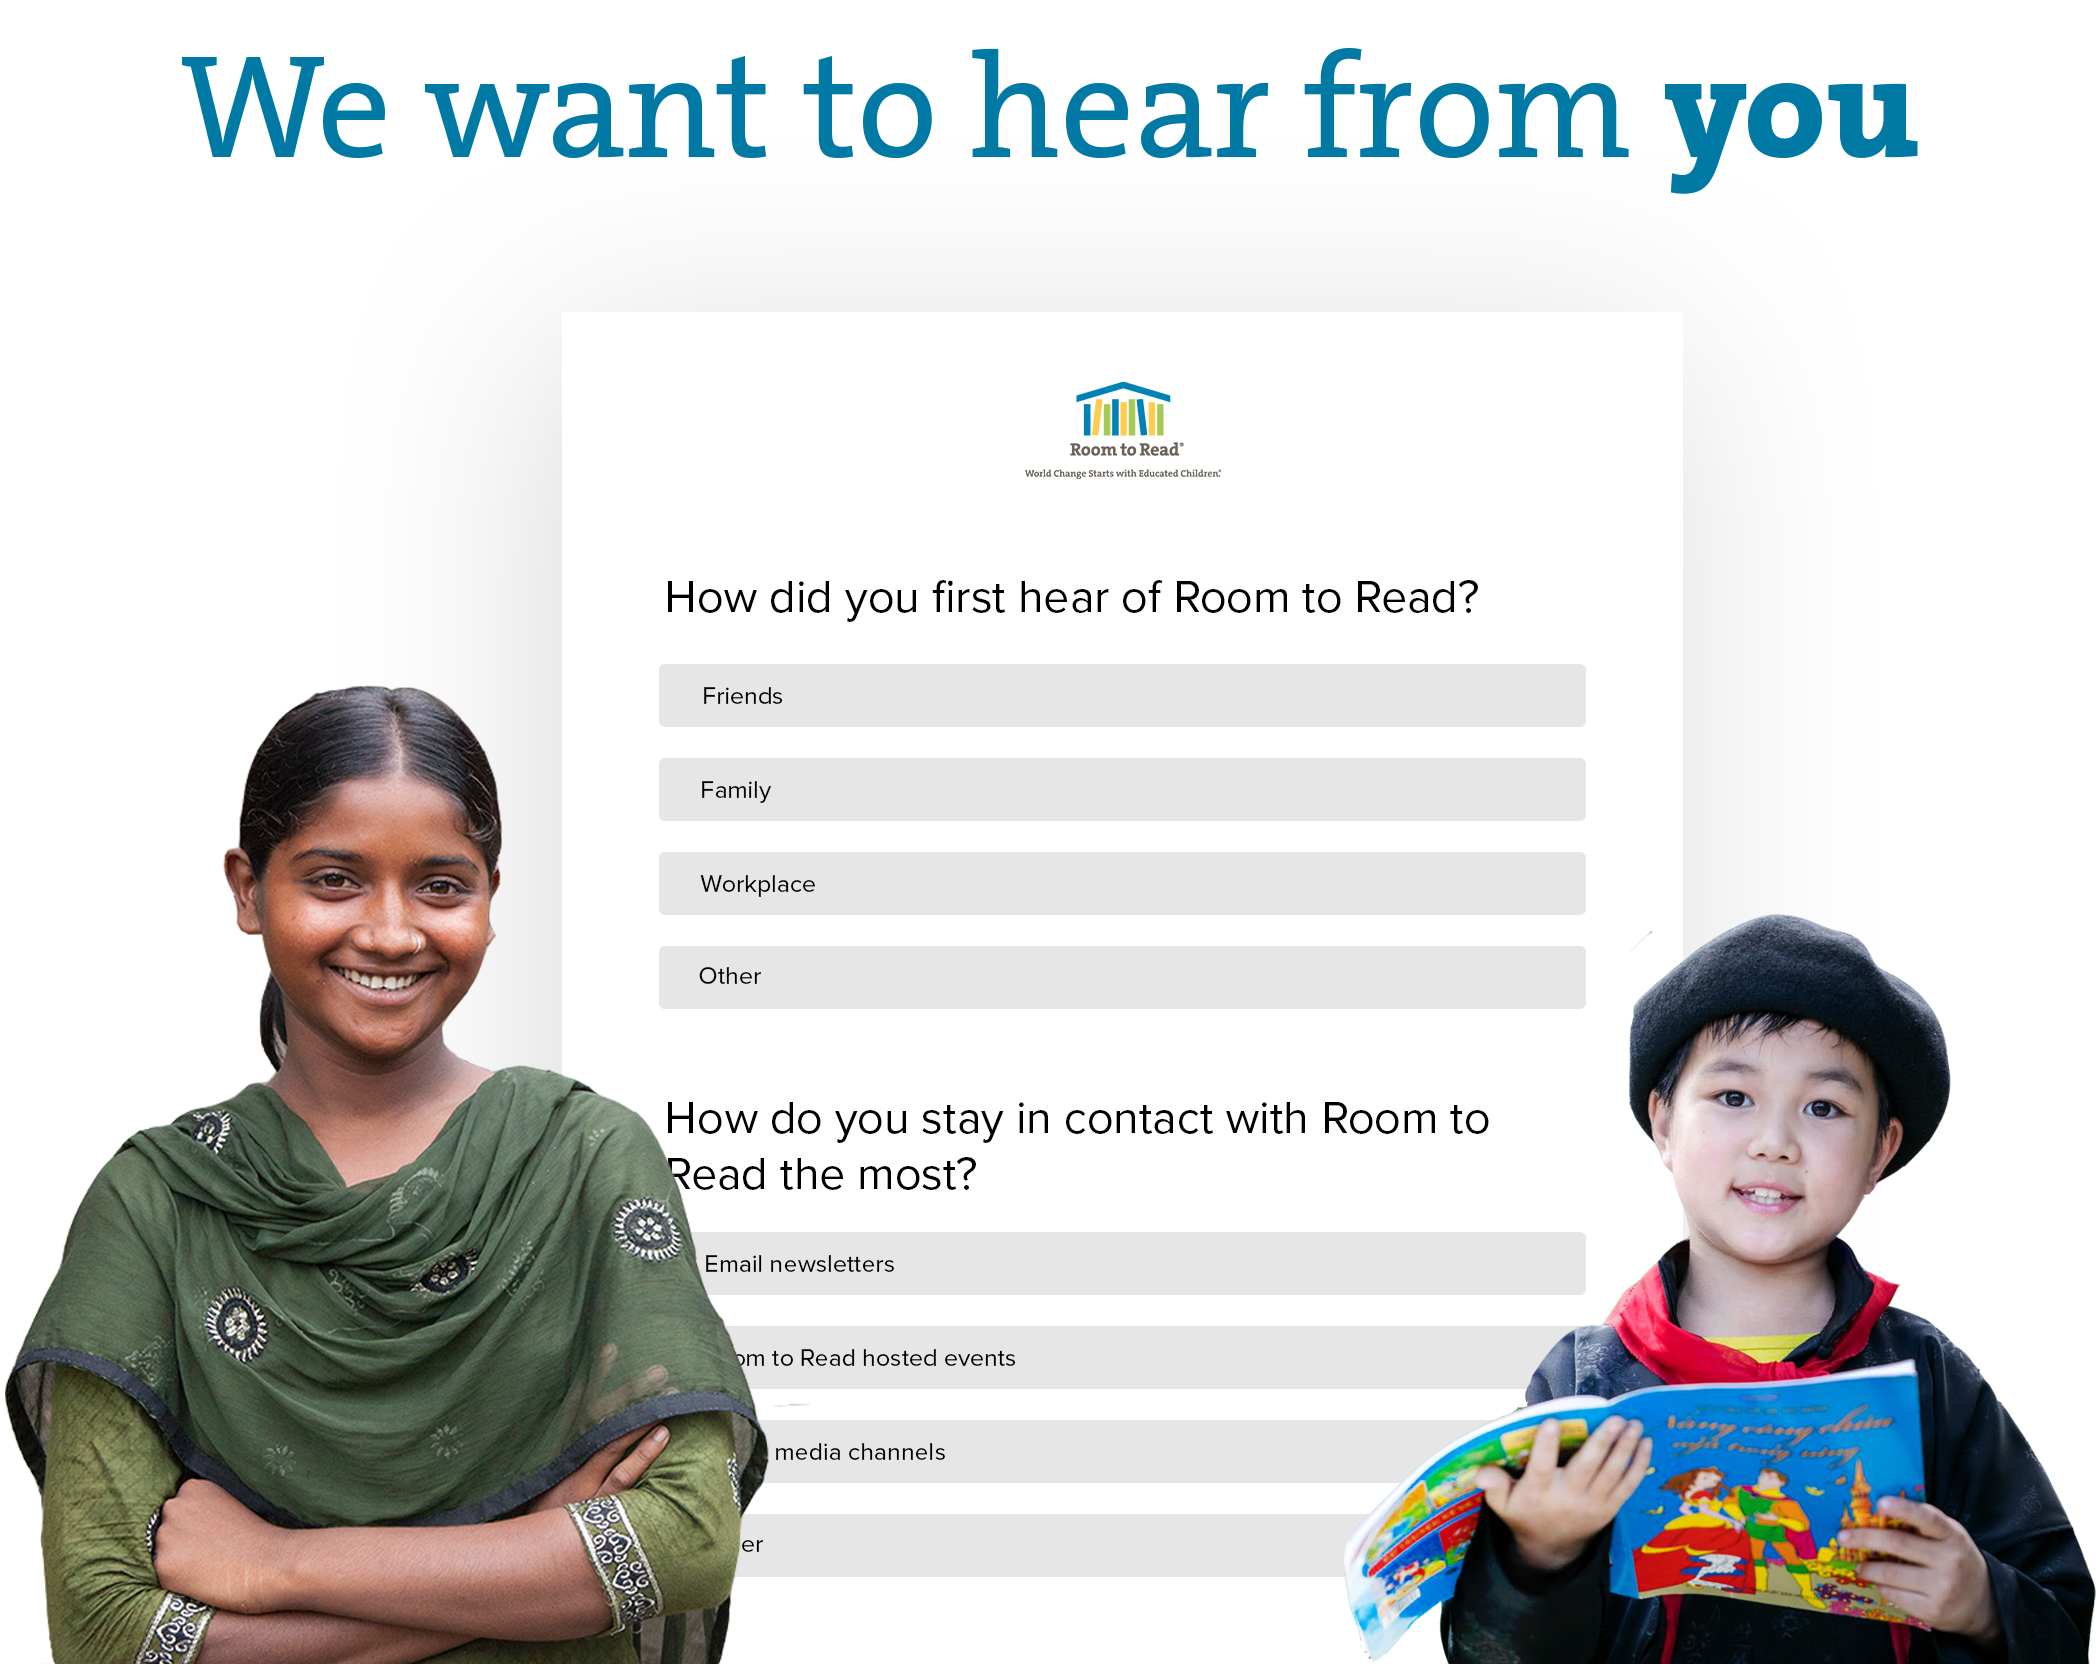 We want to hear from you!